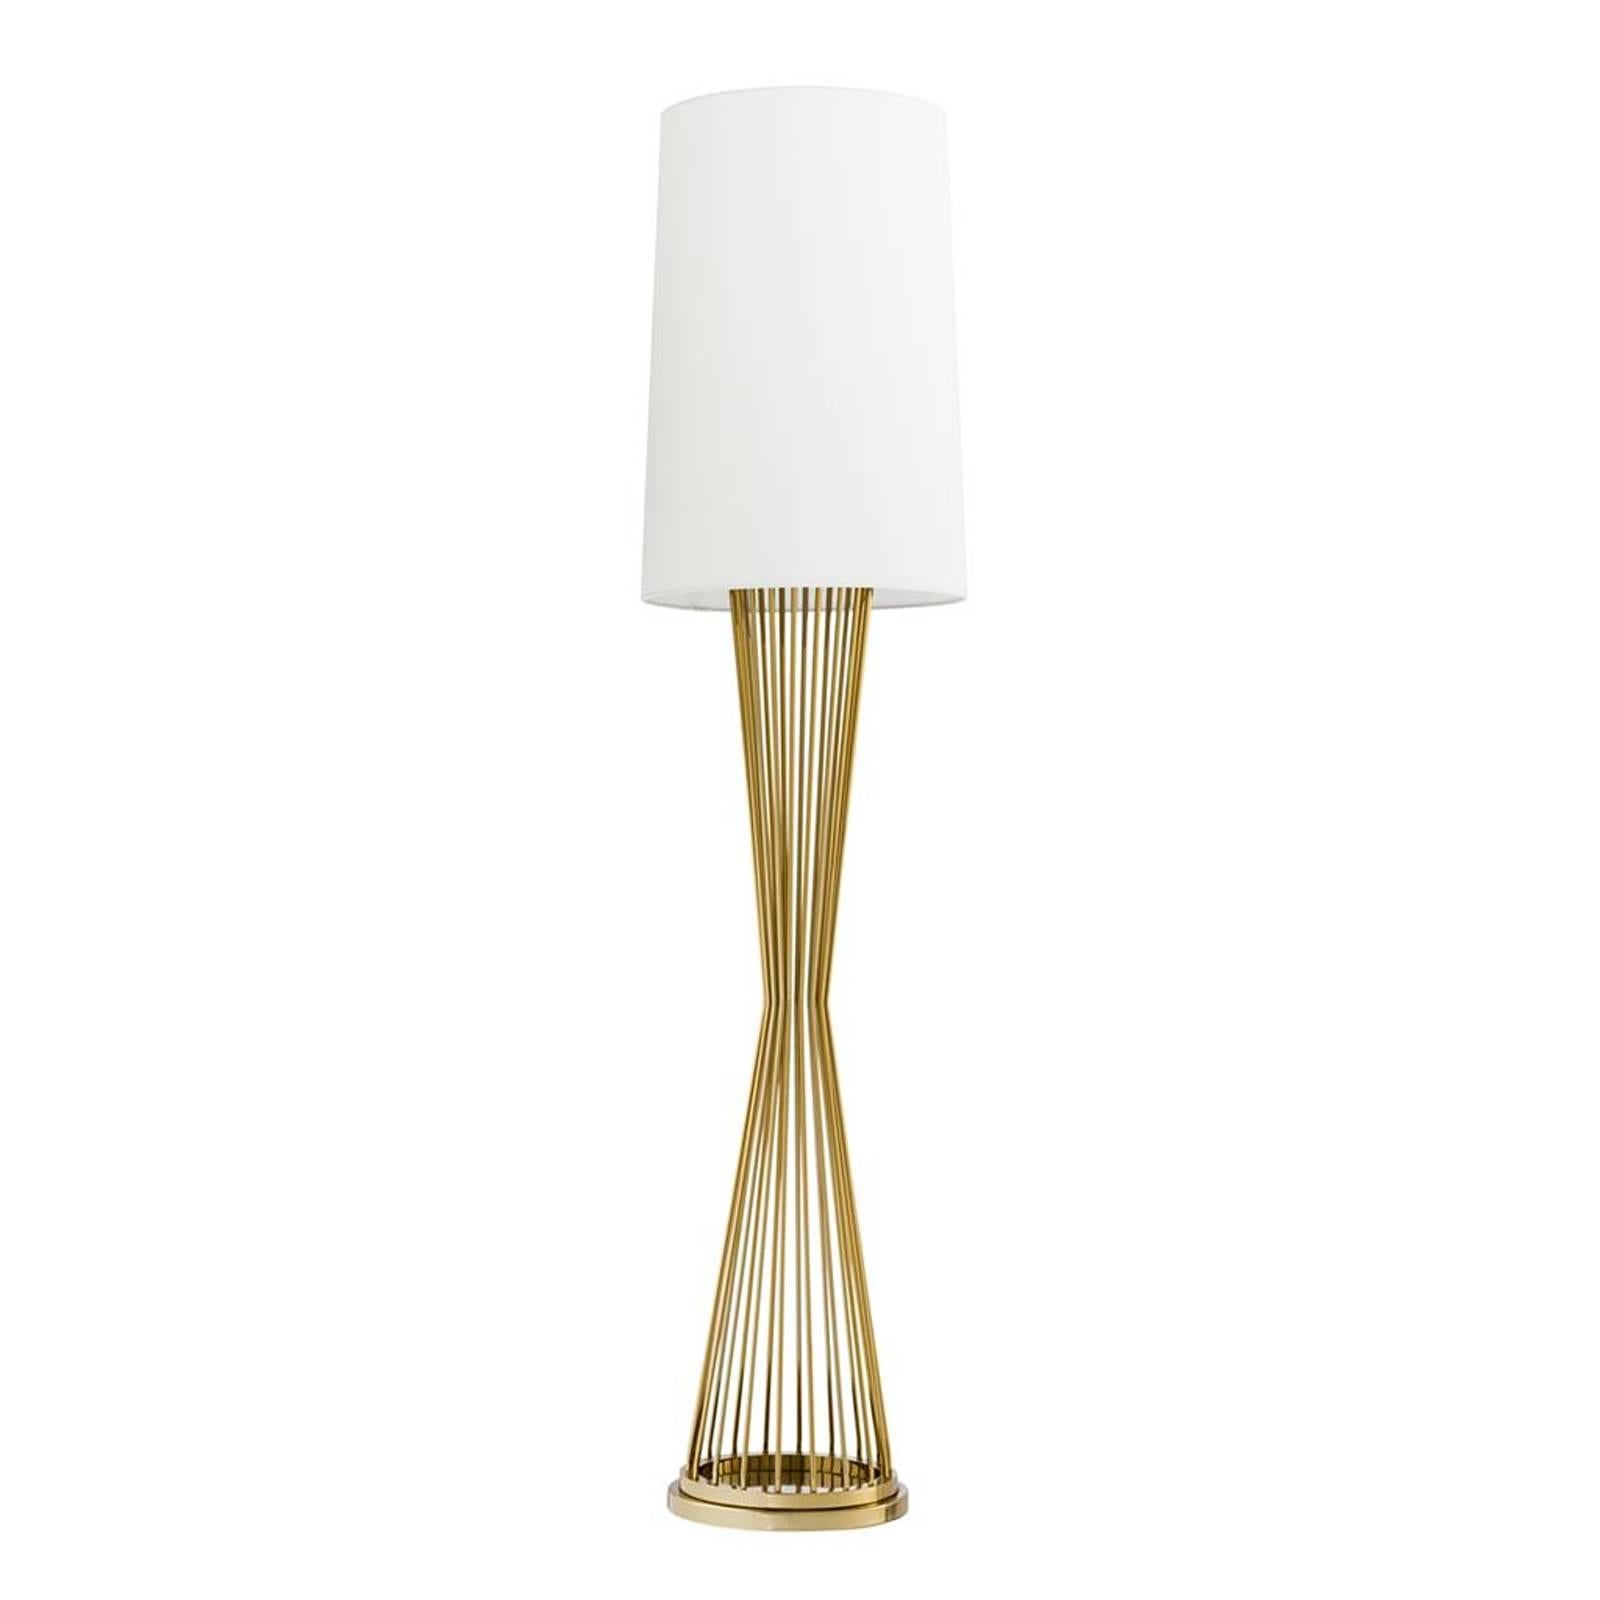 Floor lamp Barnet with base in gold finish.
Off-white shade included. One bulb, lamp holder
type E27, max 40 watt. Bulb not included.
Also available in nickel finish.
Also available in table lamp Barnet.
